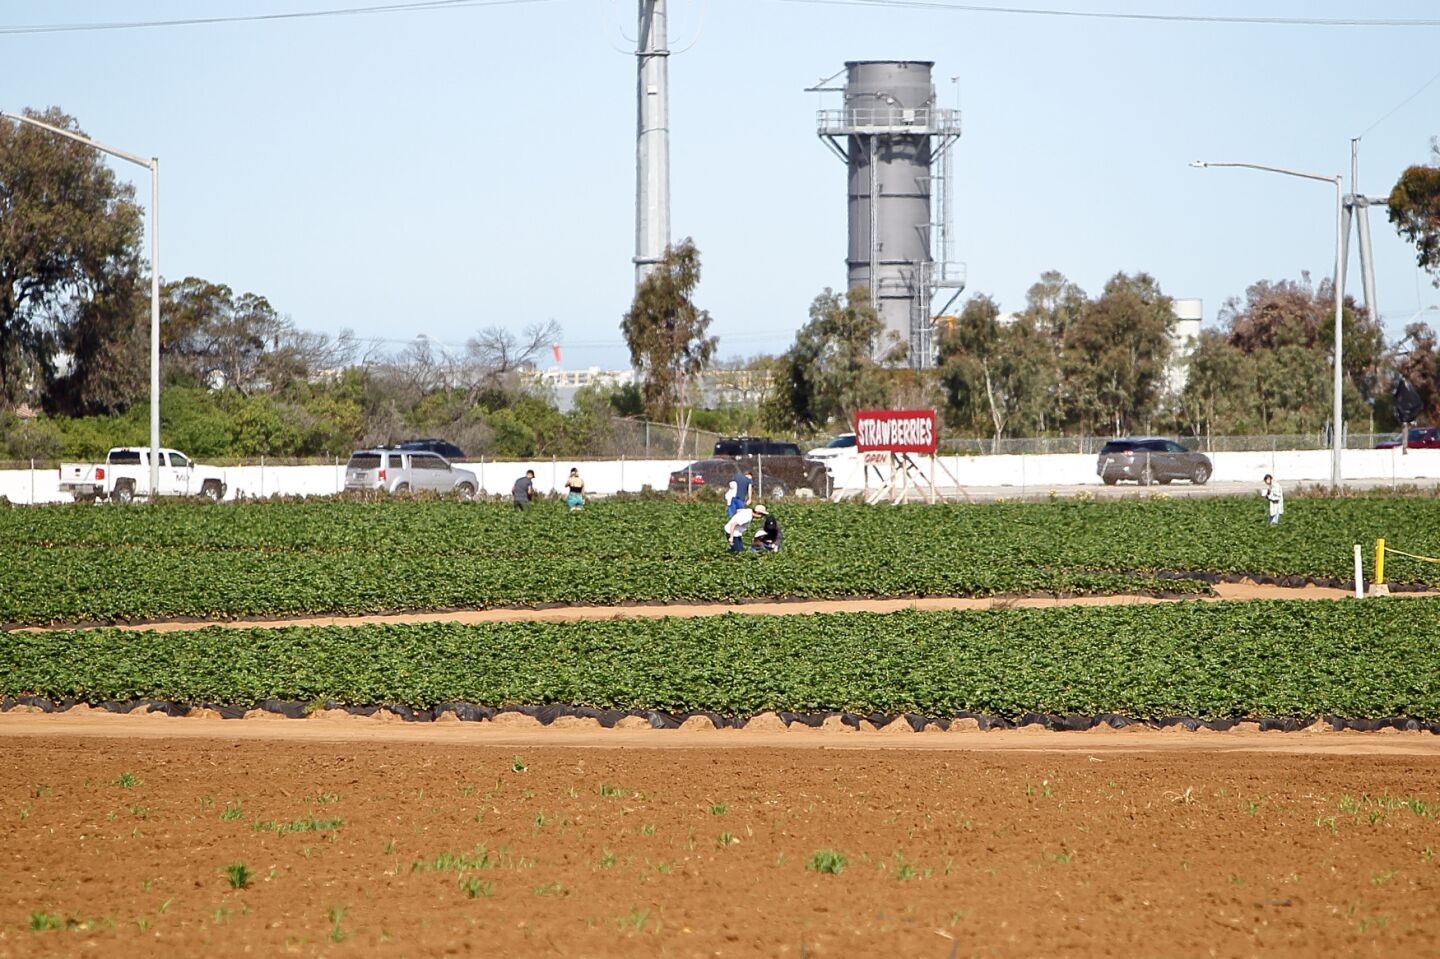 Families enjoy picking strawberries together at the Carlsbad Strawberry Company